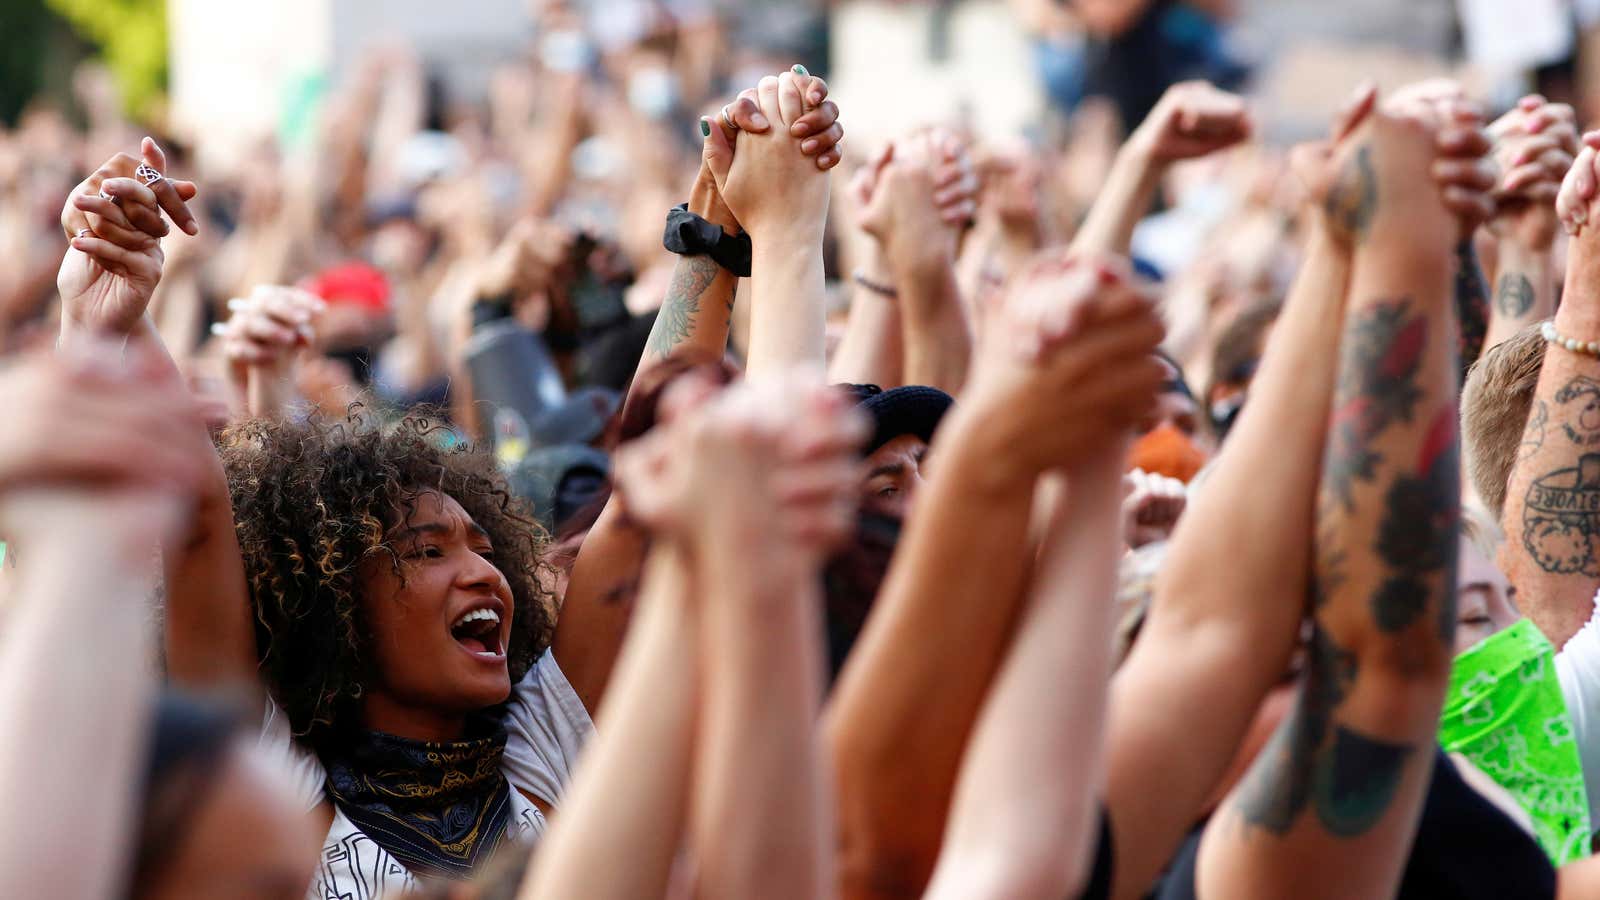 Protestors clasp hands in solidarity at a protest against racial inequality.